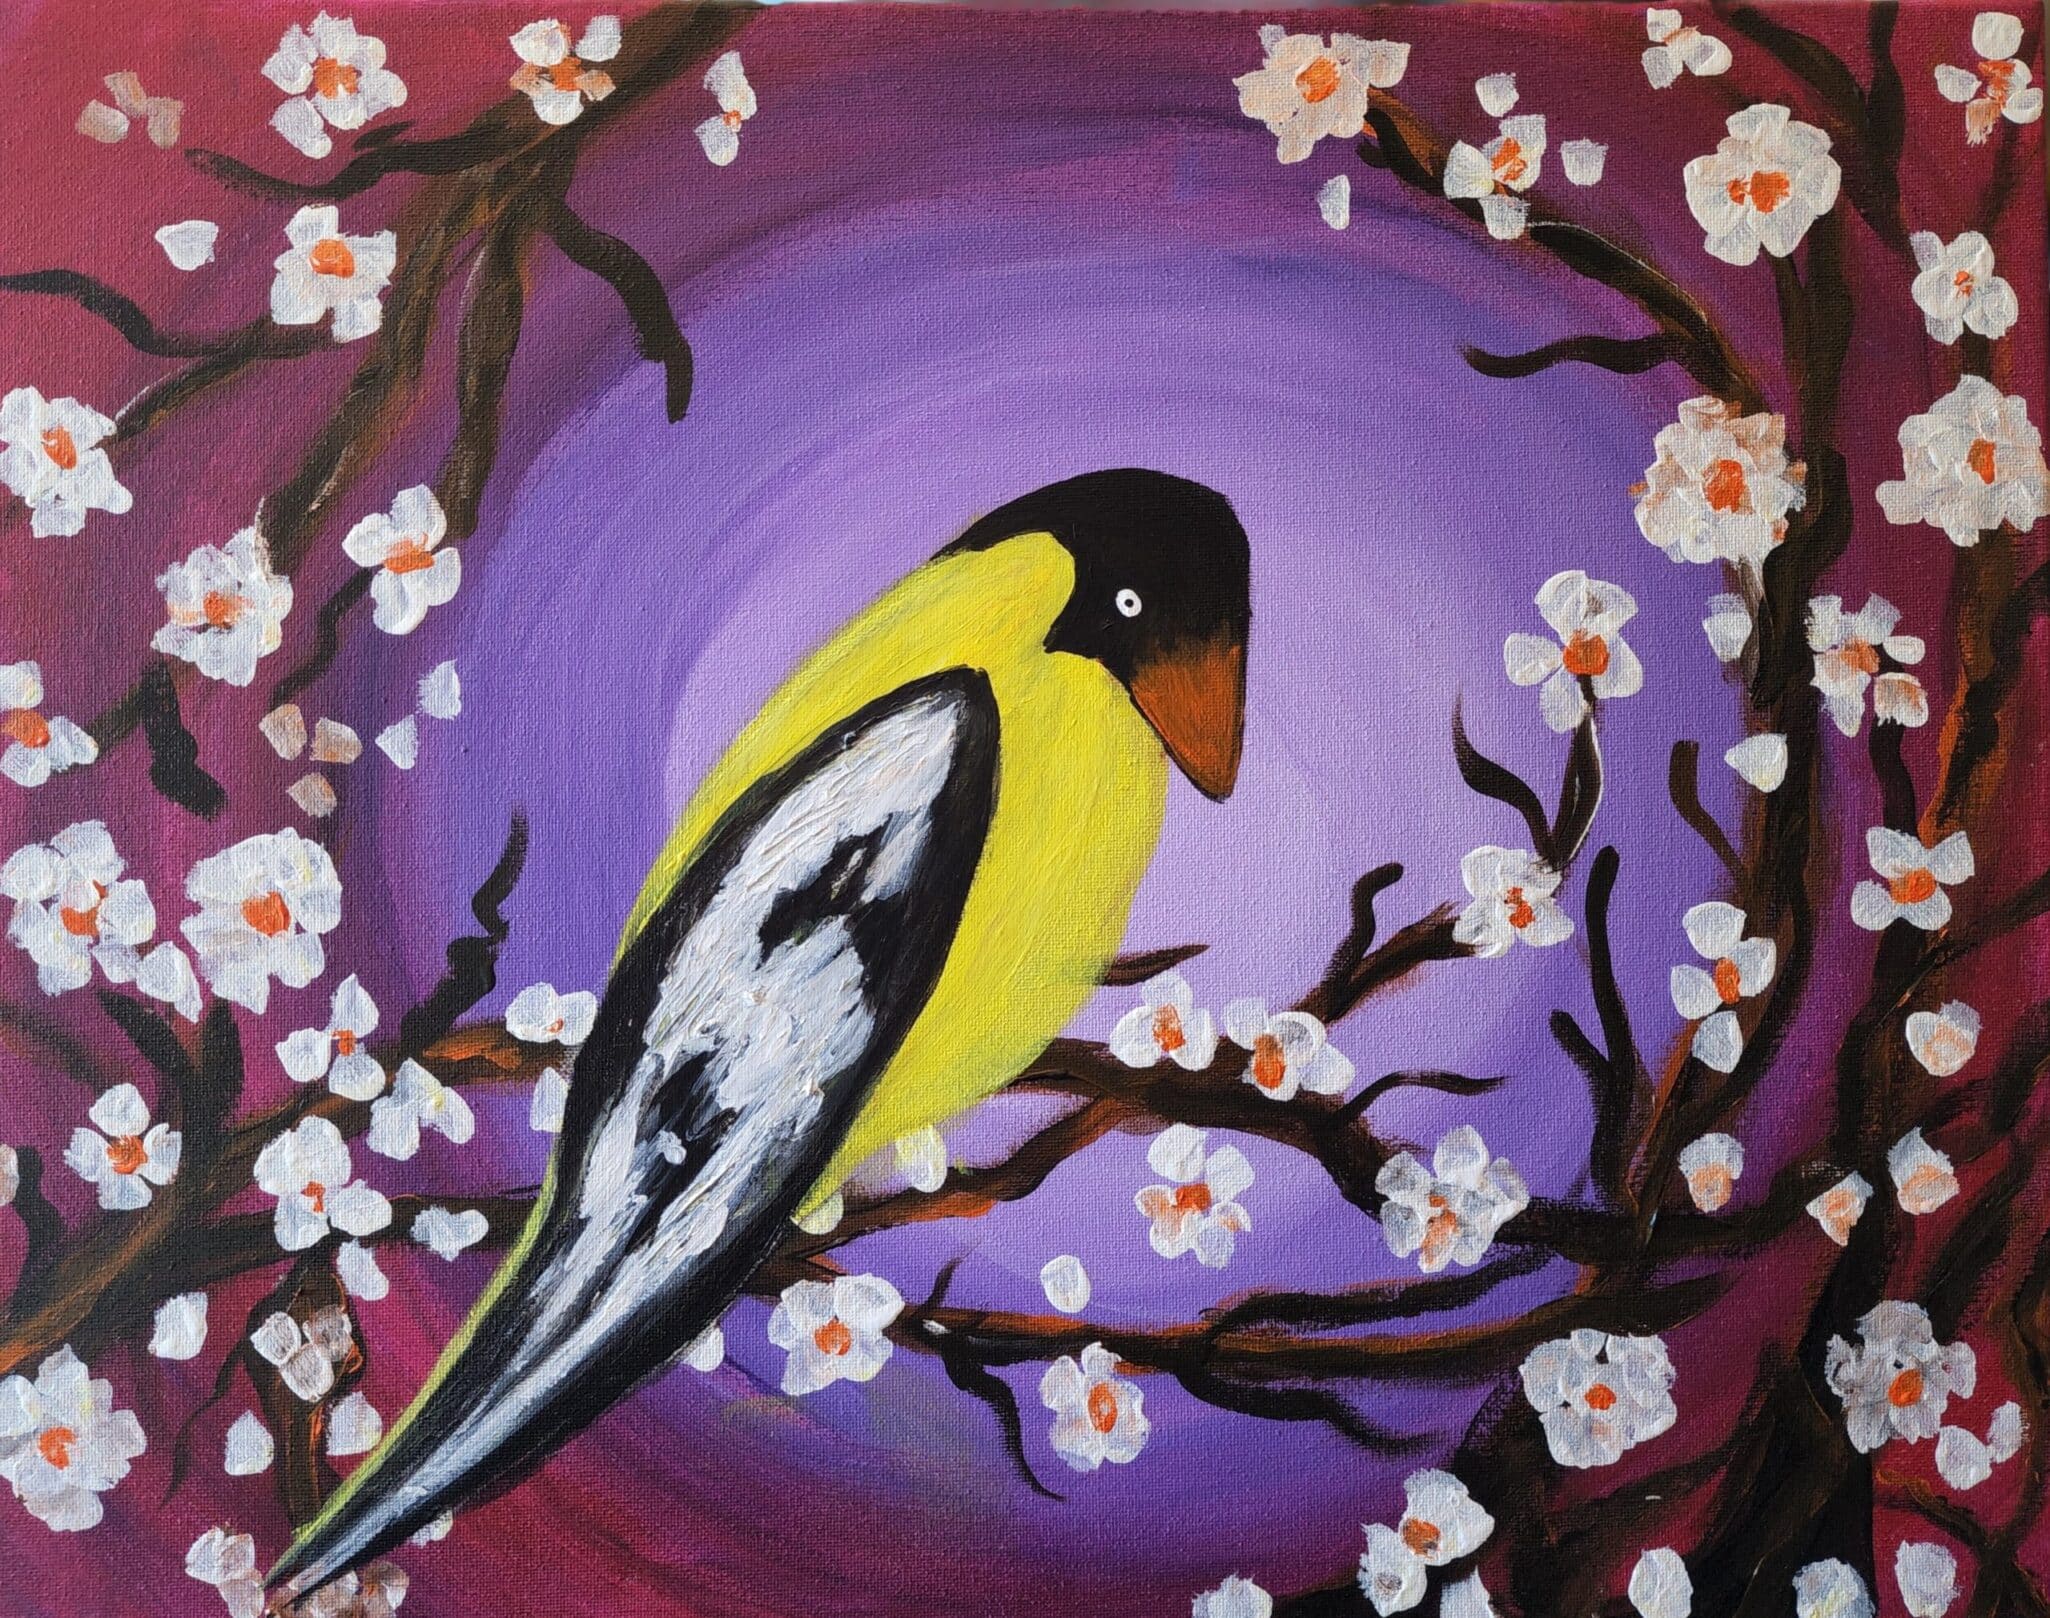 Image of painting called Golden Finch paint and sip painting event.